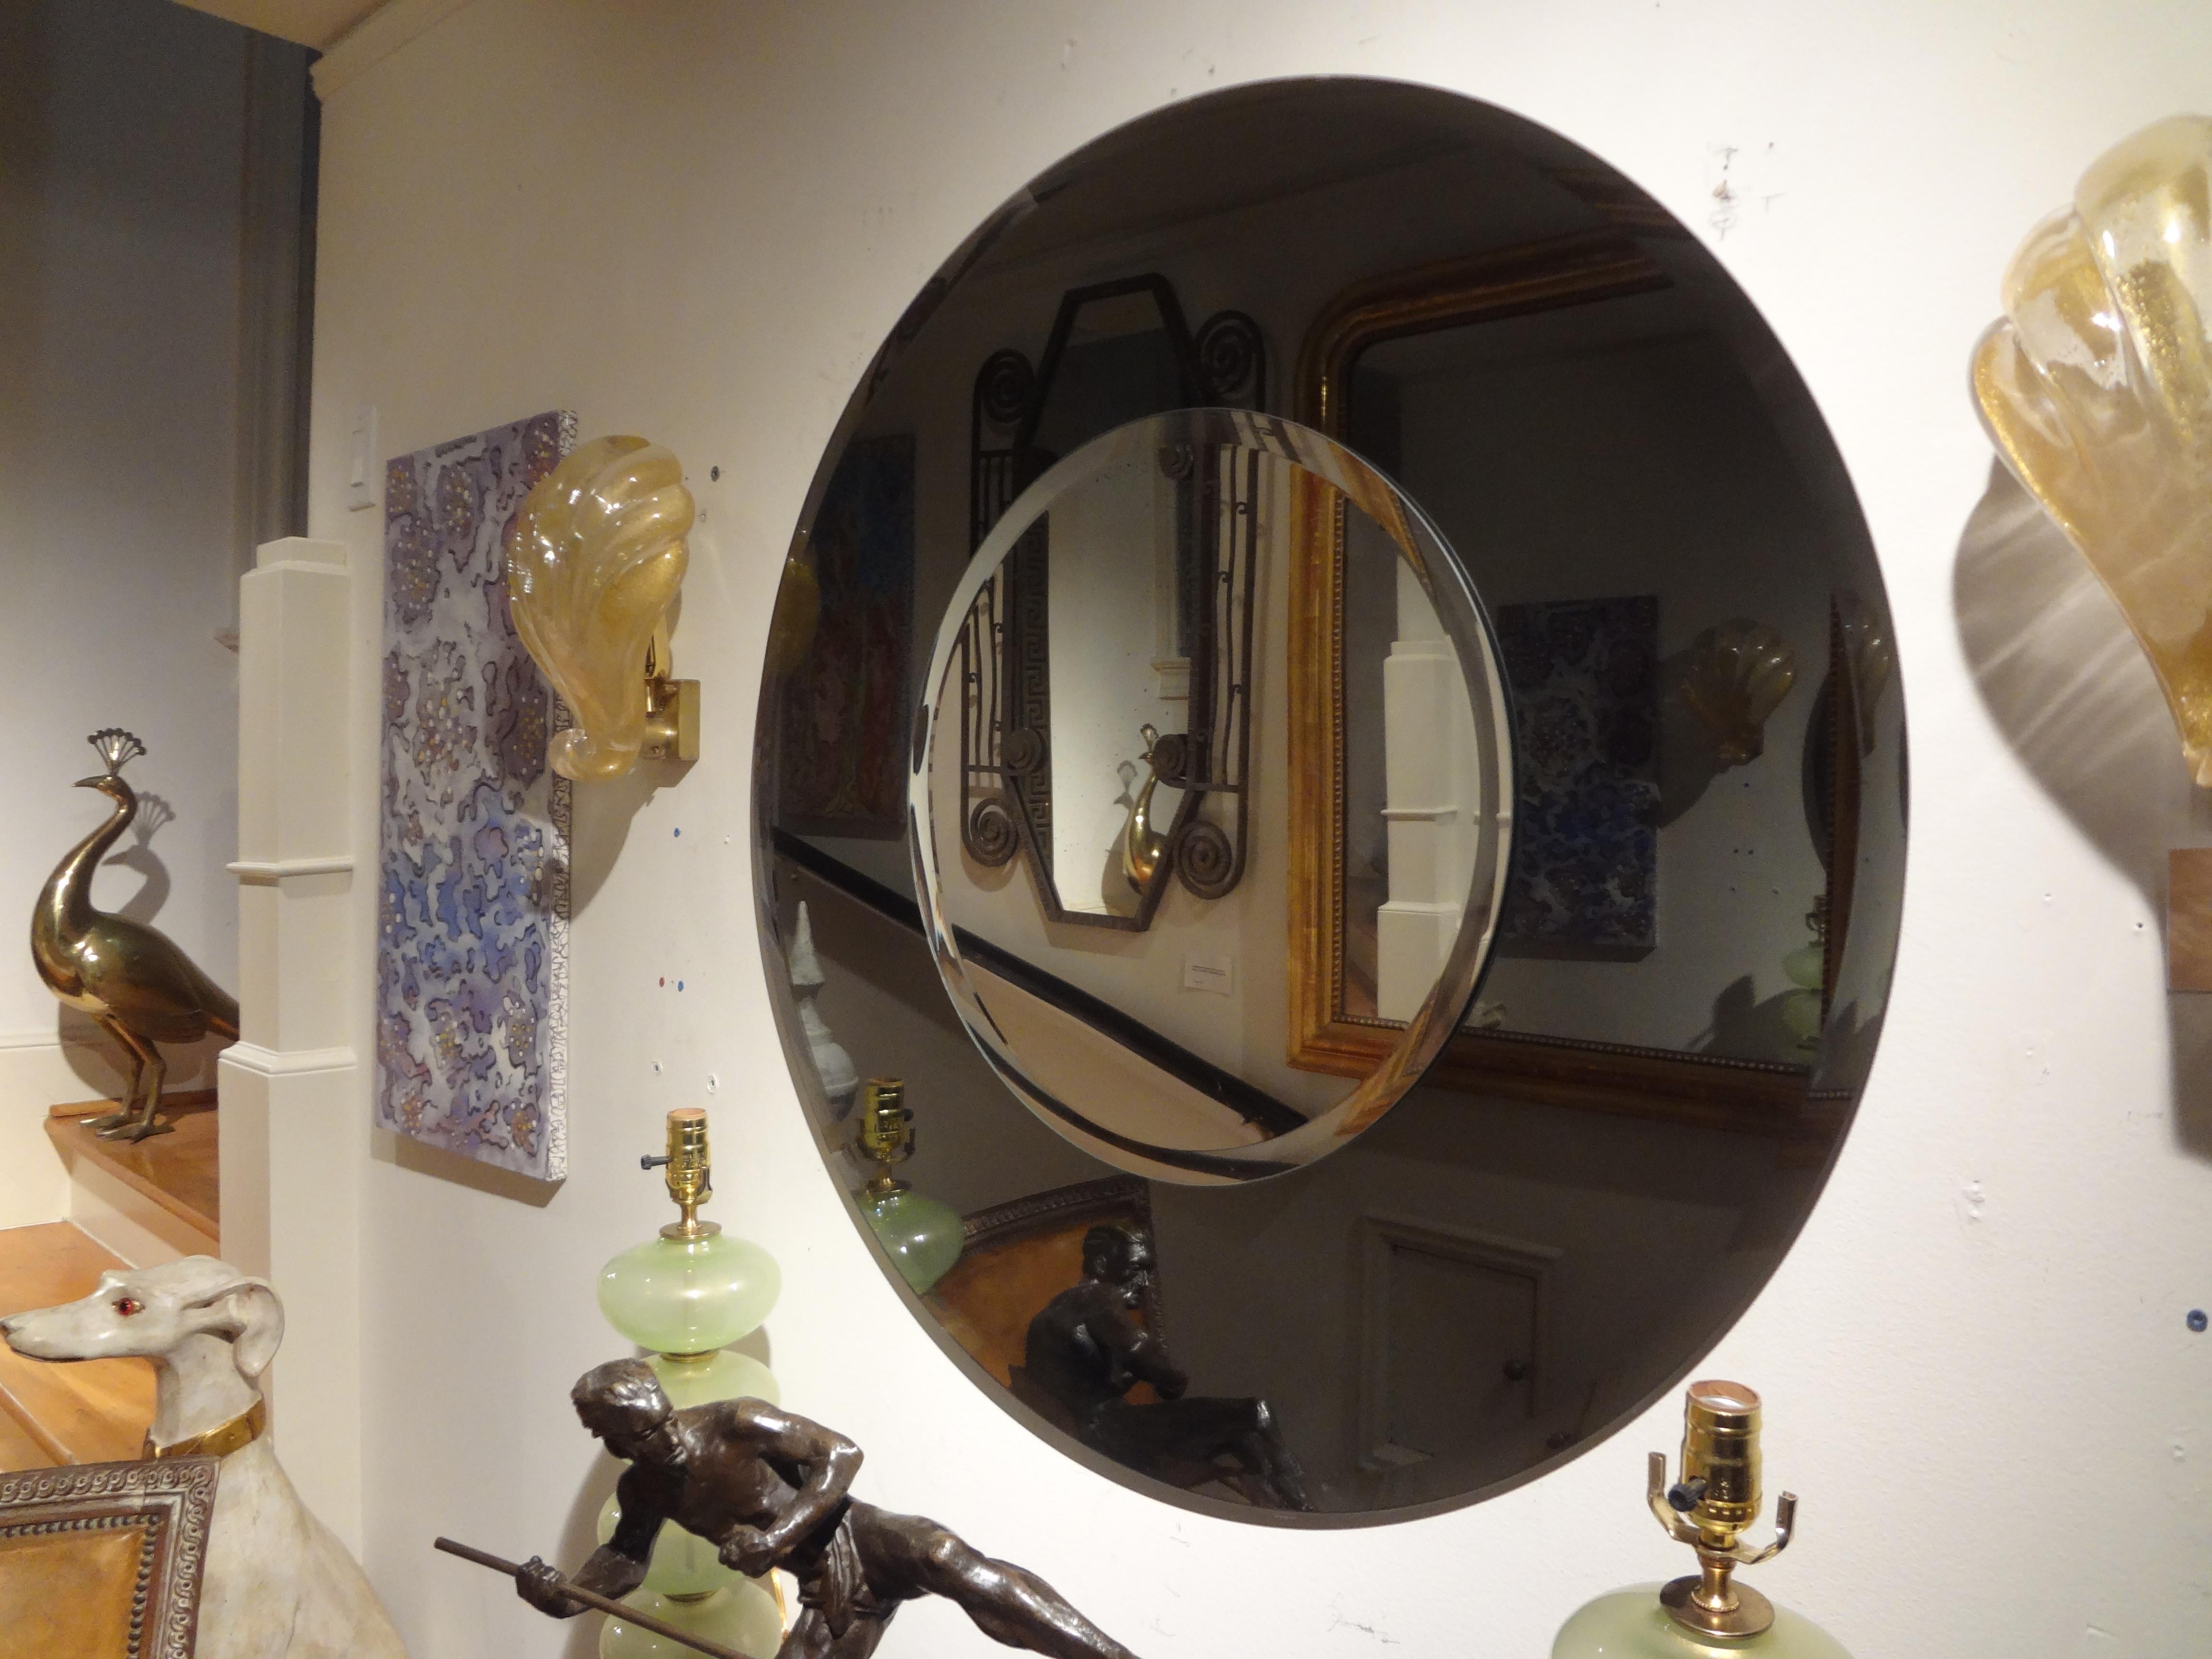 Large Italian Fontana Arte style round beveled mirror.
Stunning large round Italian Fontana Arte inspired round beveled mirror. This beautiful Mid-Century Modern Italian mirror has a black beveled perimeter with a silver beveled central